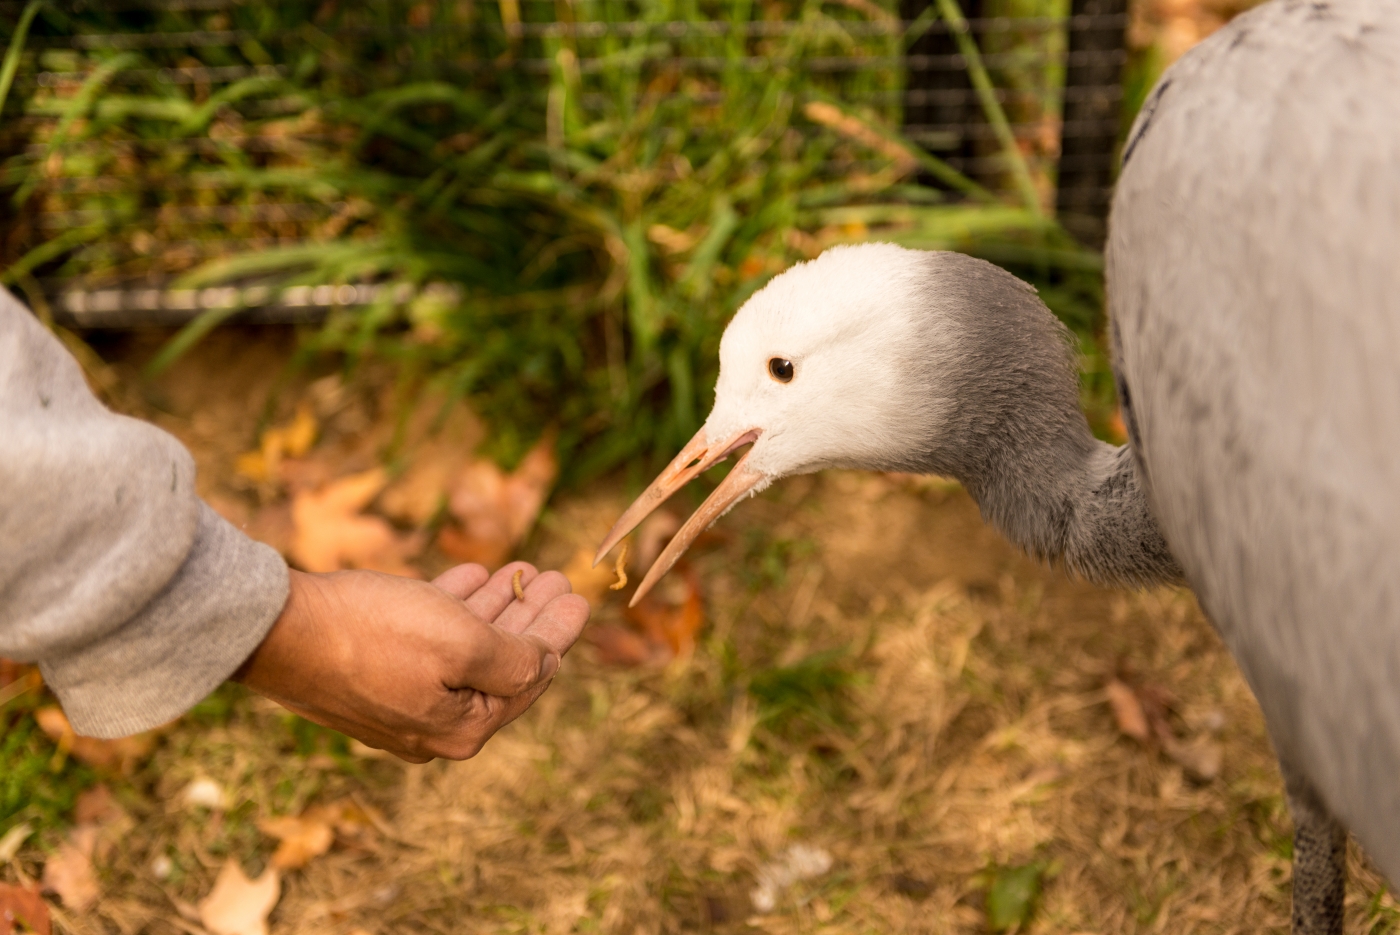 Blue crane eats mealworms from a keeper's hand